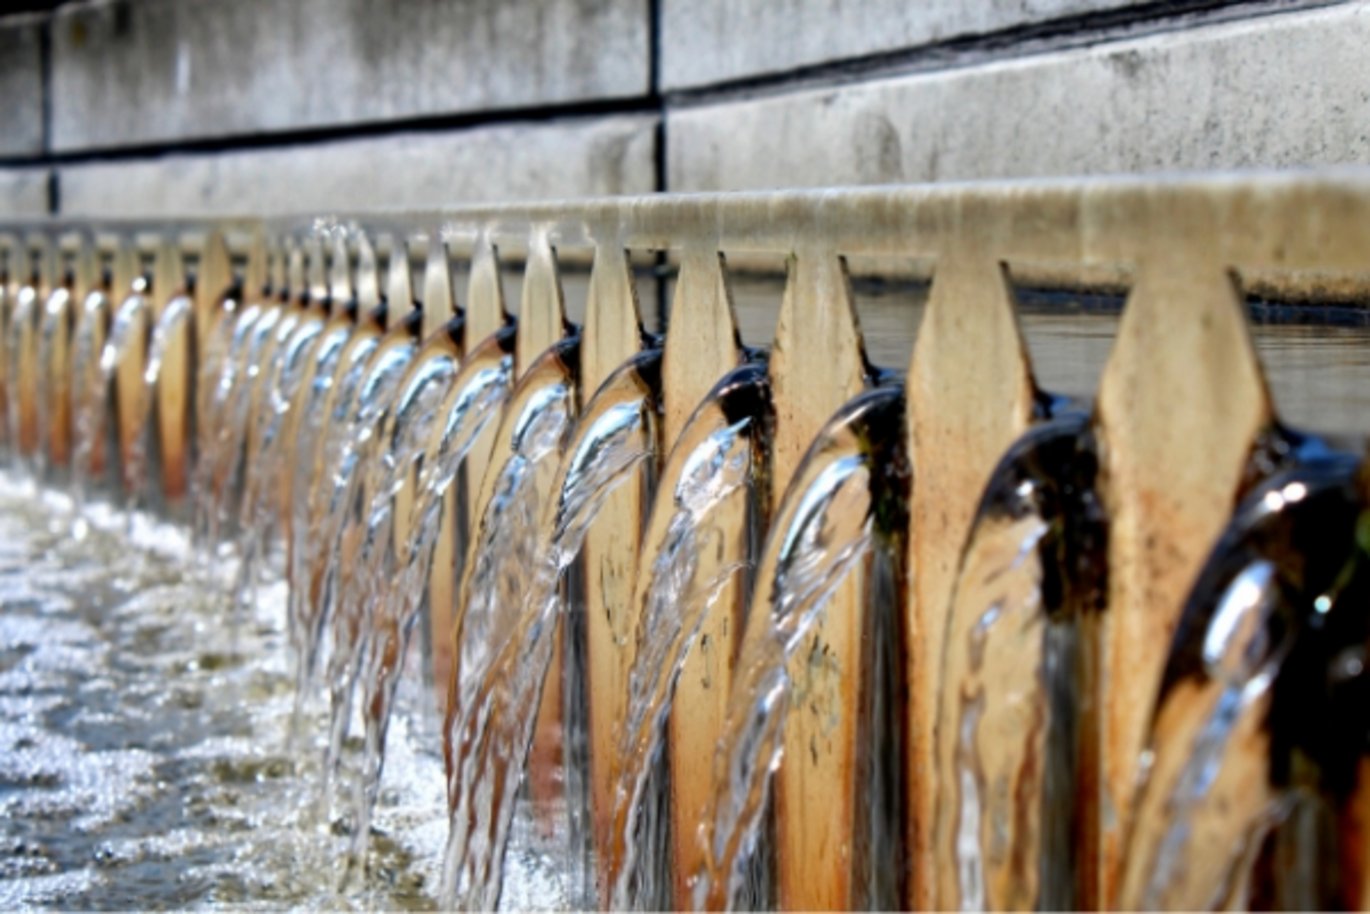 Picture shows water running through a "Secondary Clarifier" under the wastewater treatment process.